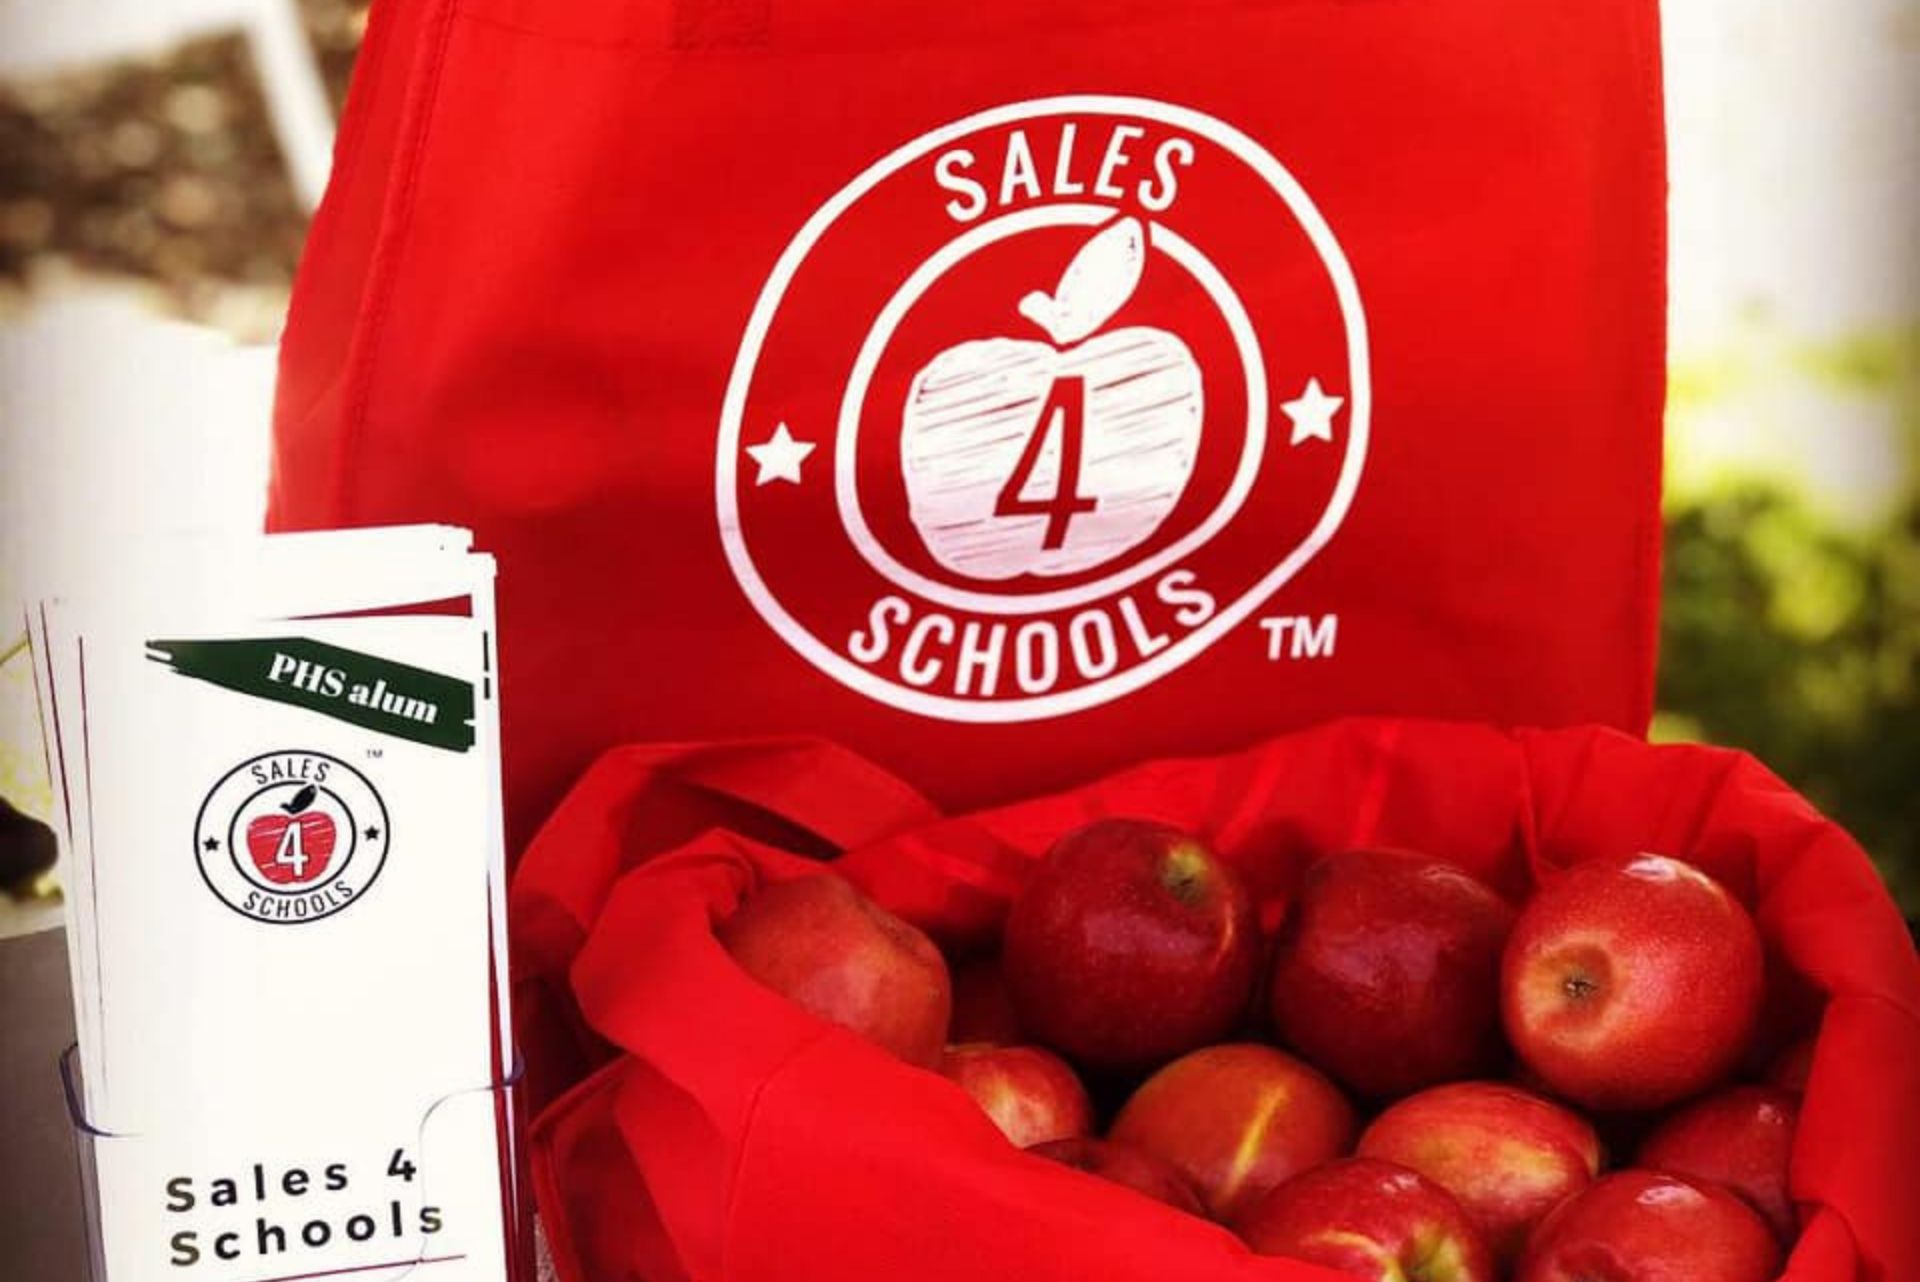 sales 4 schools shopping tote apples